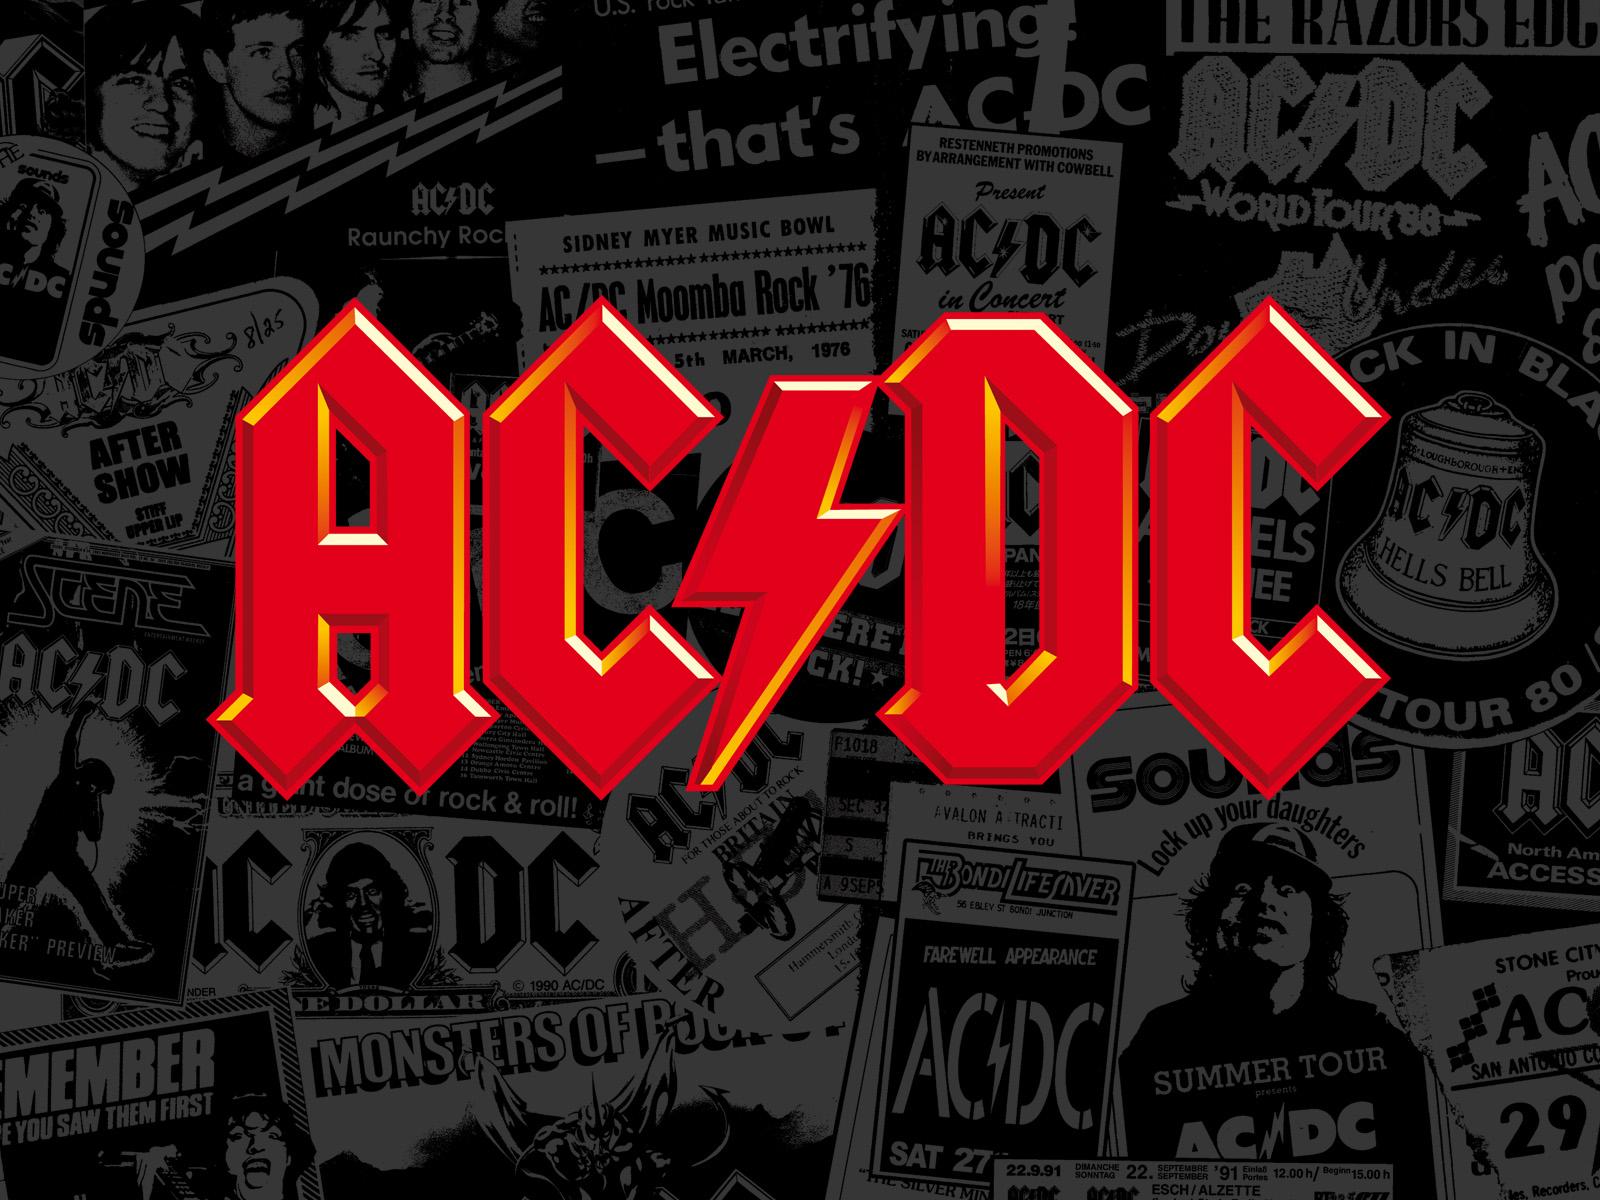 Ac/dc complete discography download torrent download